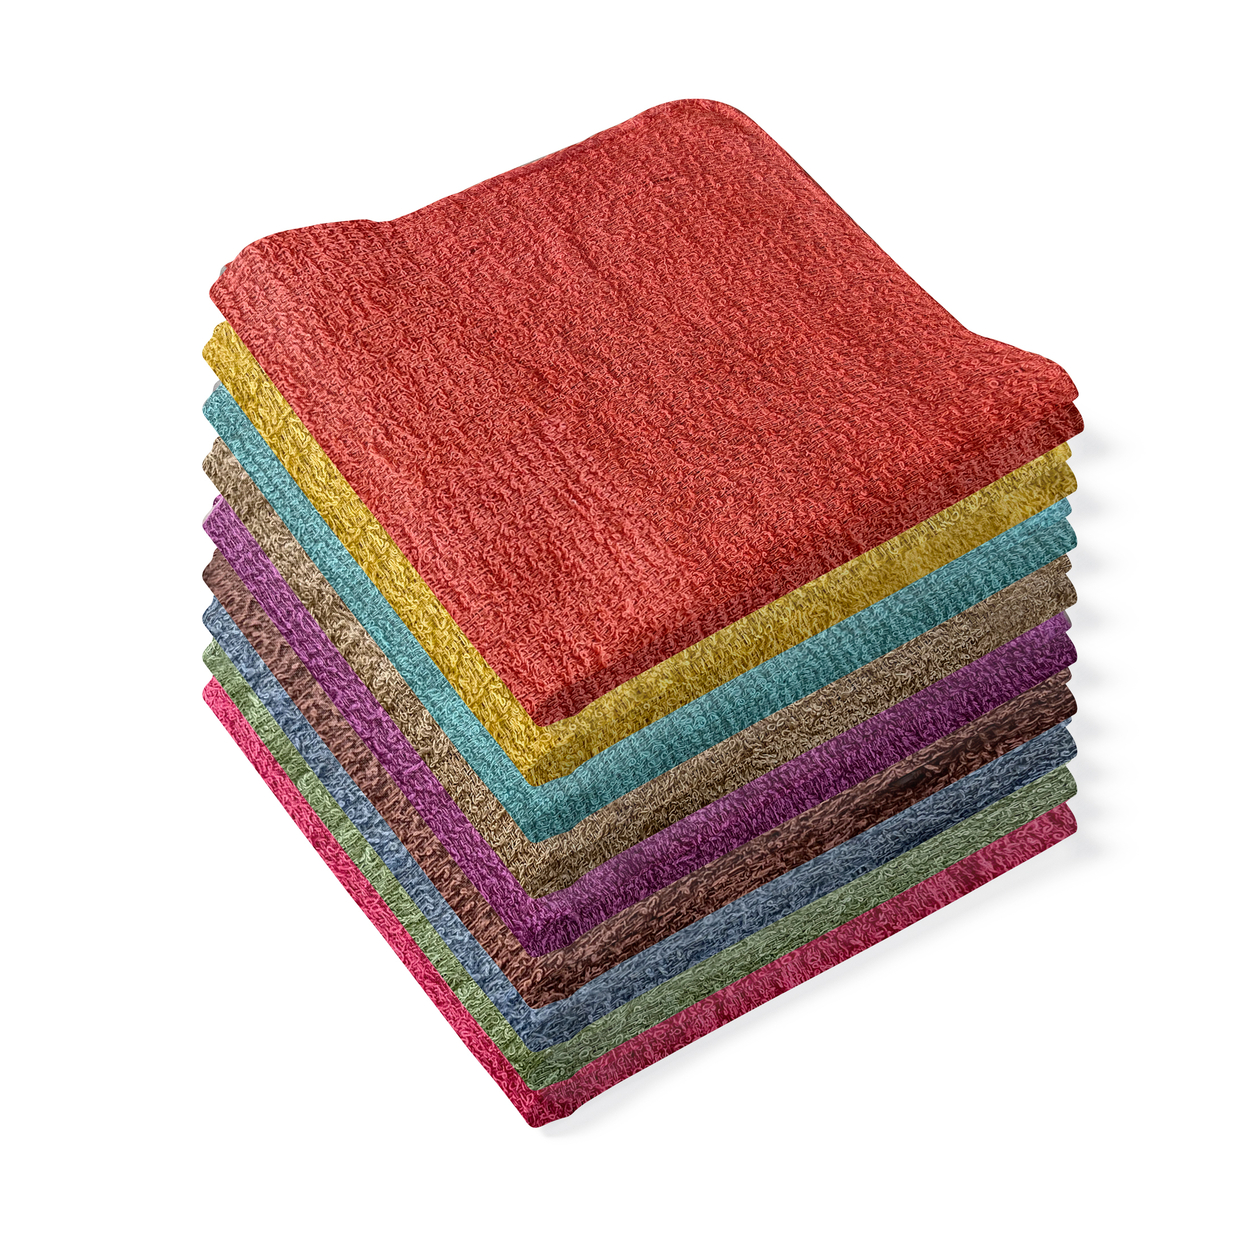 Multi-Pack: 100% Ultra-Soft Absorbent Cotton Multipurpose Cleaning Wash Cloths - 12-pack